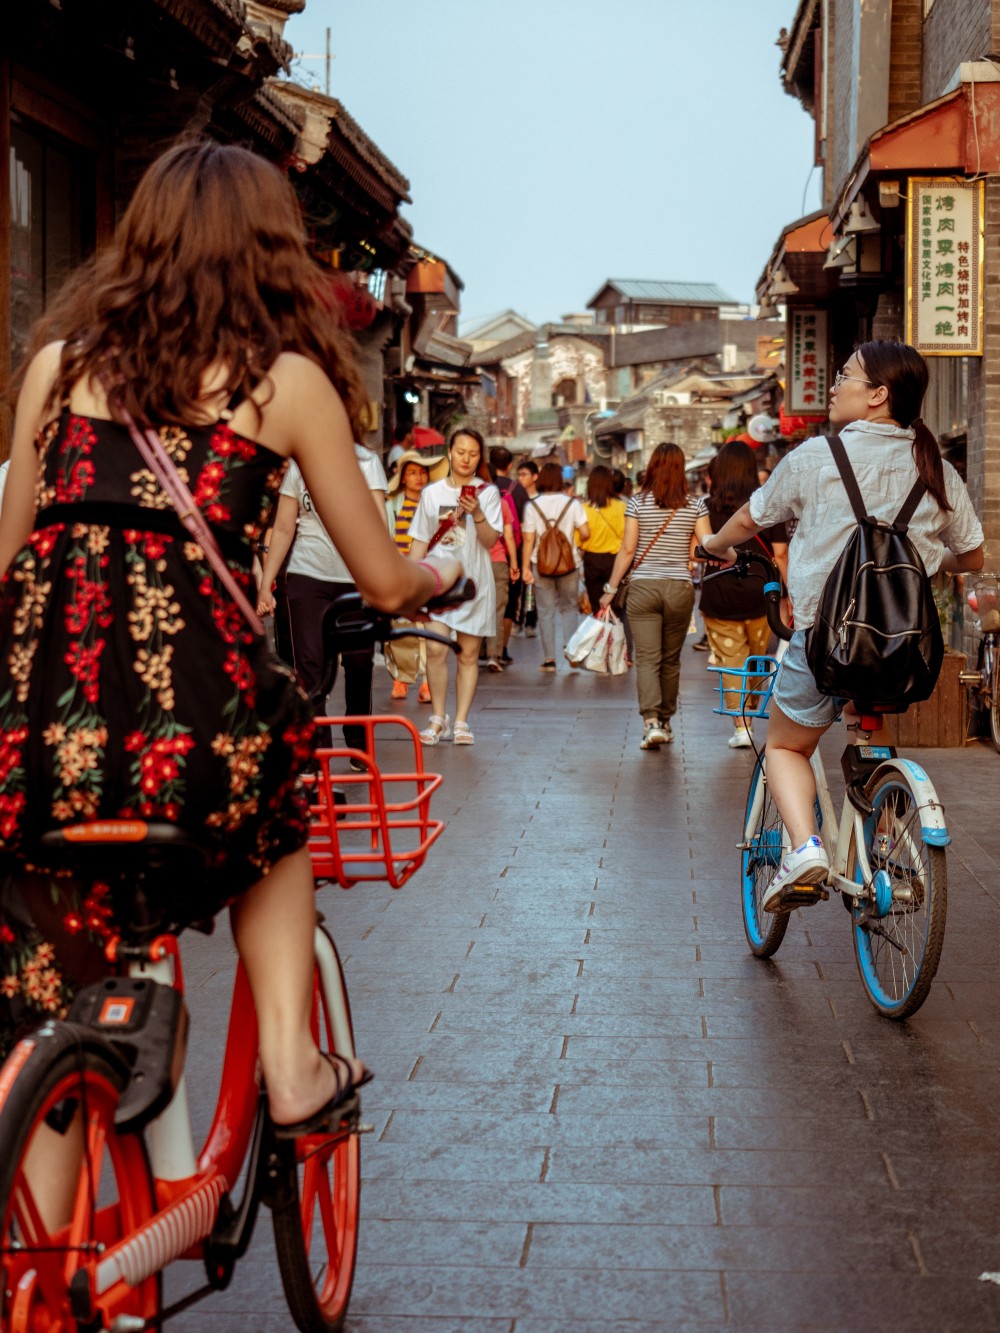 How to Stay Healthy (and Safe) When Spending Time in China.